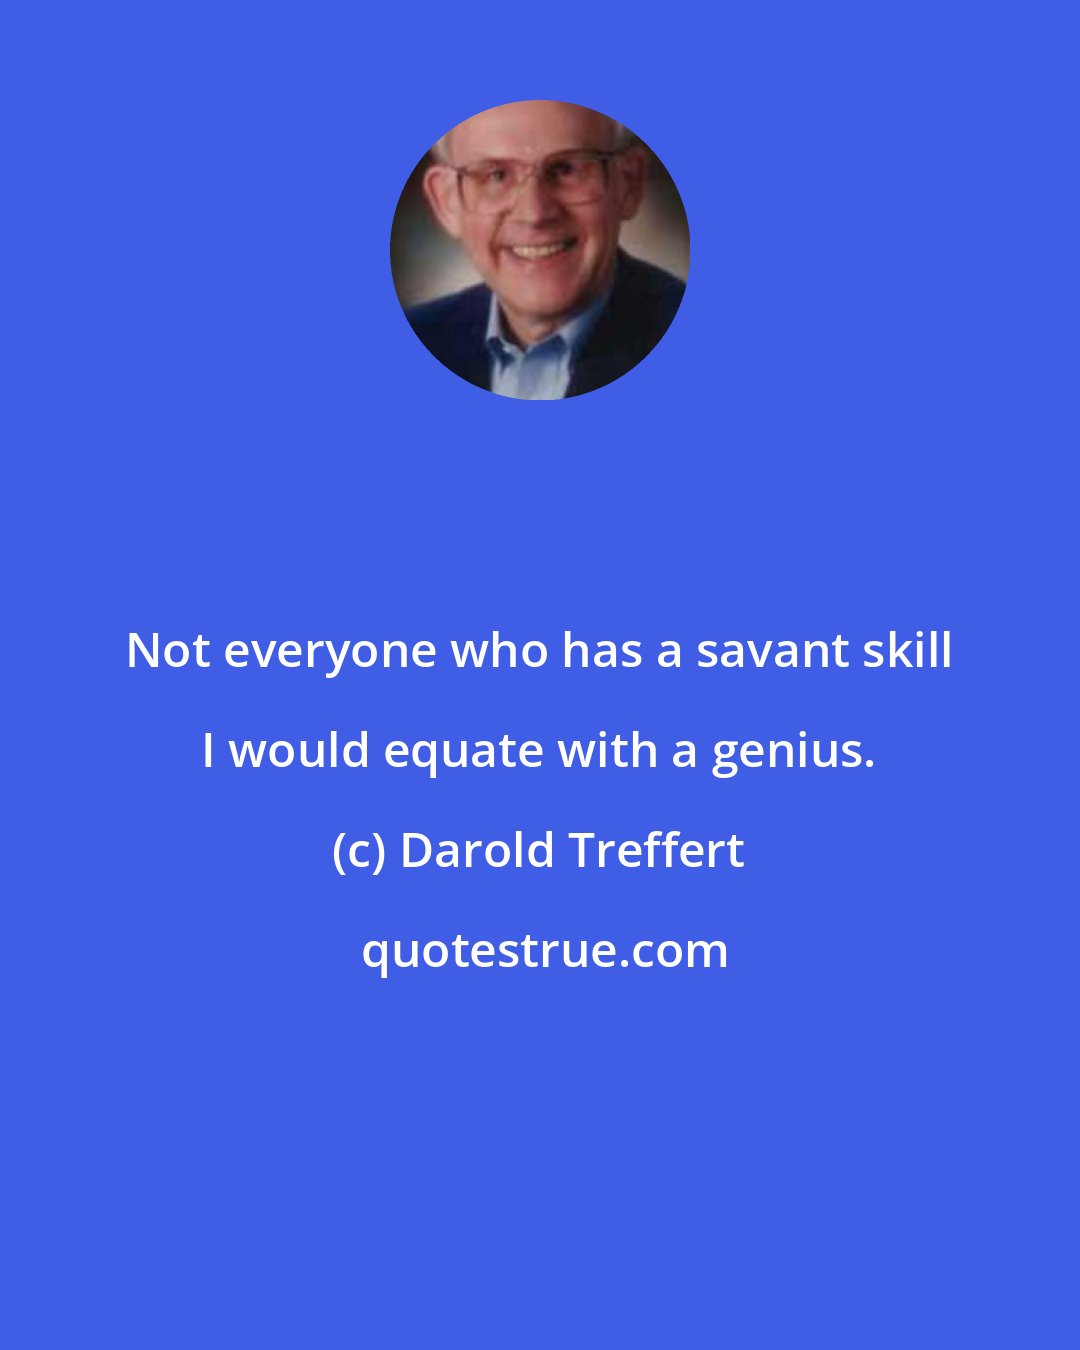 Darold Treffert: Not everyone who has a savant skill I would equate with a genius.